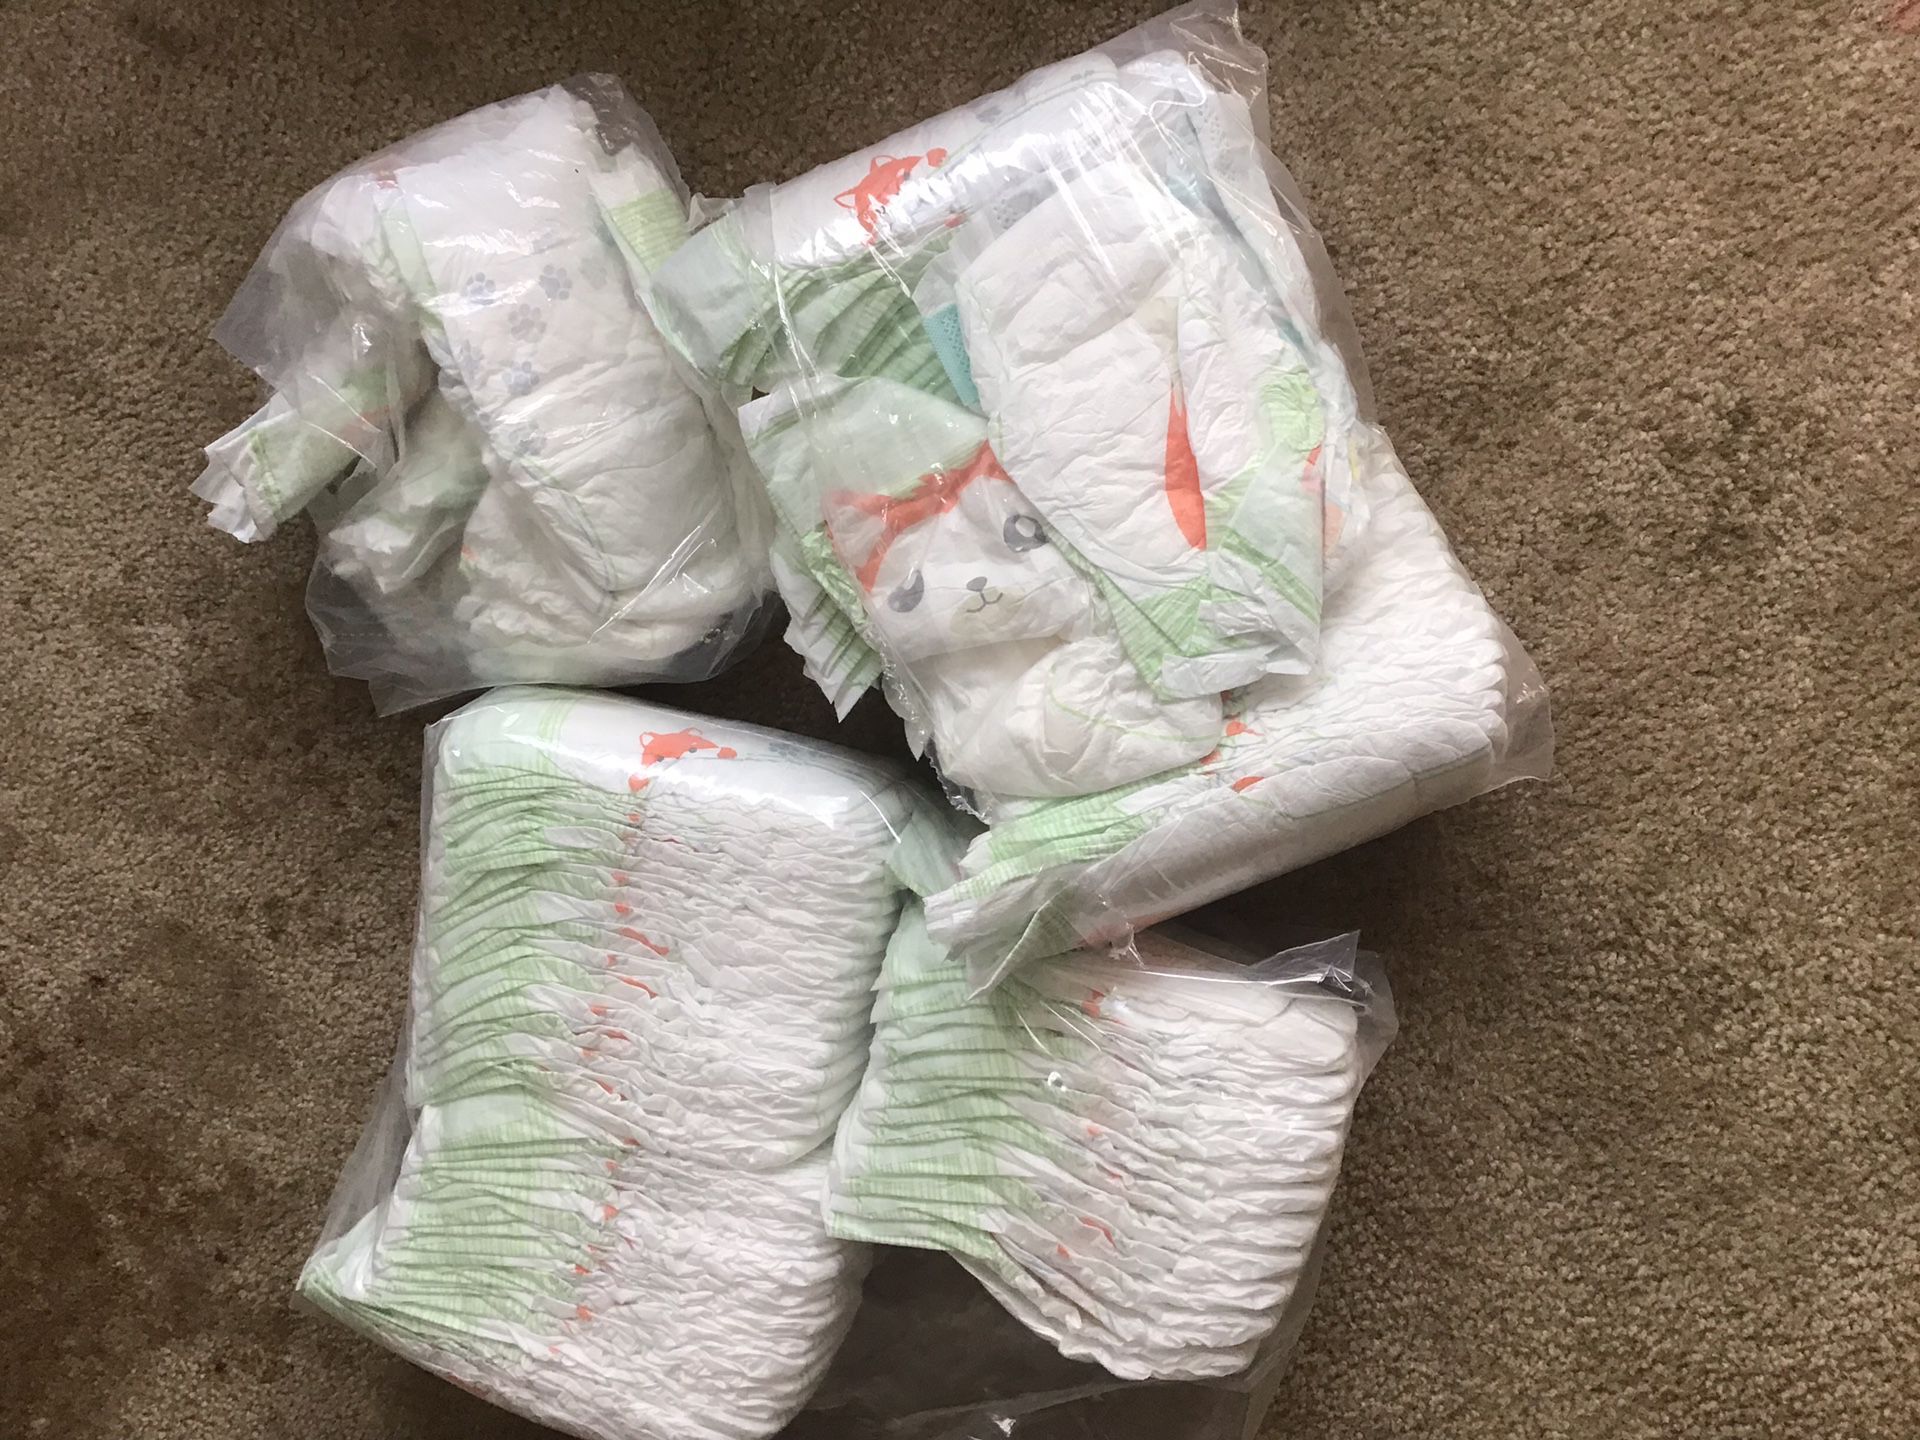 Brand new diapers around 100 count